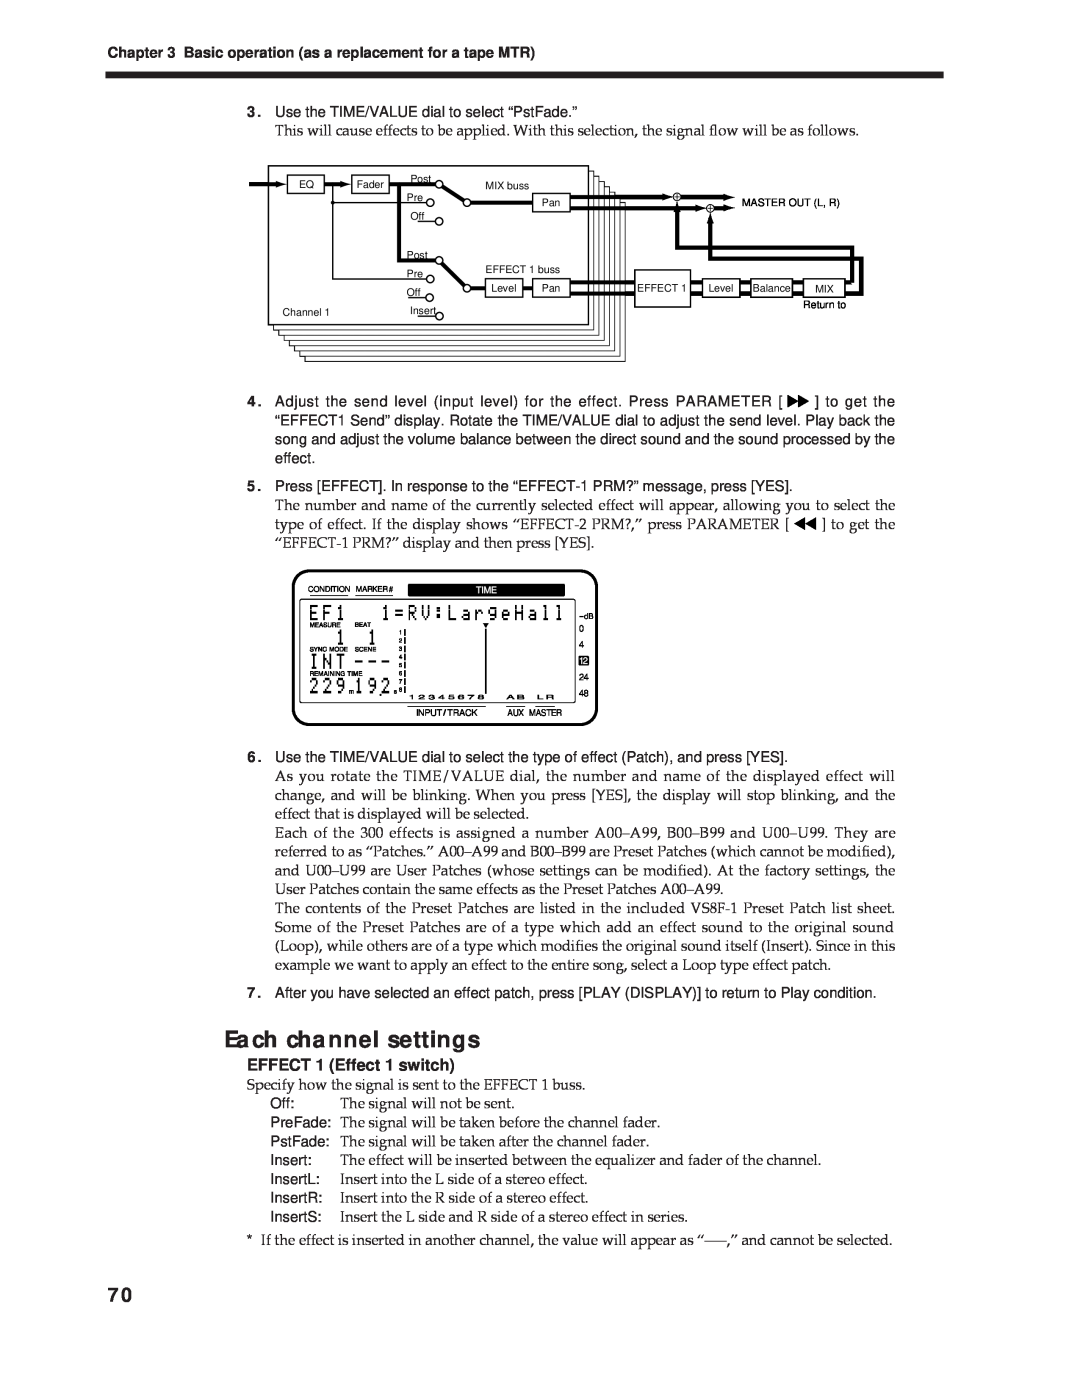 Roland Vs-880 important safety instructions Each channel settings, EFFECT 1 Effect 1 switch 